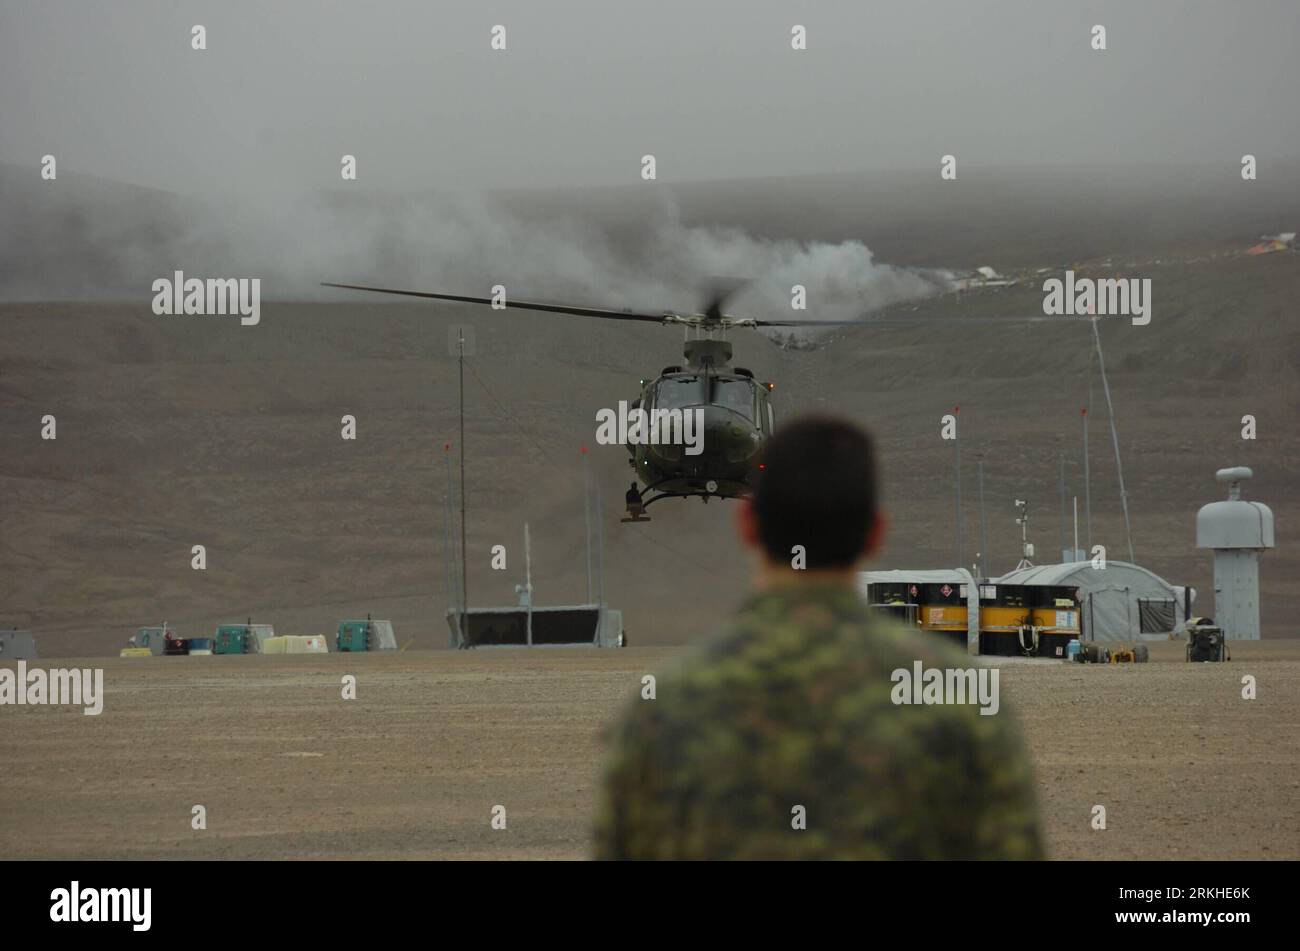 Bildnummer: 55809899  Datum: 20.08.2011  Copyright: imago/Xinhua (110822) -- OTTAWA, Aug. 22, 2011 (Xinhua) -- A Canadian Forces helicopter lands in Resolute Bay on Saturday, Aug. 20, 2011 as smoke billows from the crash scene in the background. A charter flight of Canada s First Air, a Boeing 737-200, crashed Saturday on the hills of Resolute, Nunavut, in Canada s high Arctic, killing 12 and injuring three others of on board. (Xinhua/Canadian Department of National Defense)(wn) CANADA-PLANE CRASH PUBLICATIONxNOTxINxCHN Gesellschaft Verkehr Luftfahrt Flugzeugabsturz Absturz Militär Soldaten Re Stock Photo